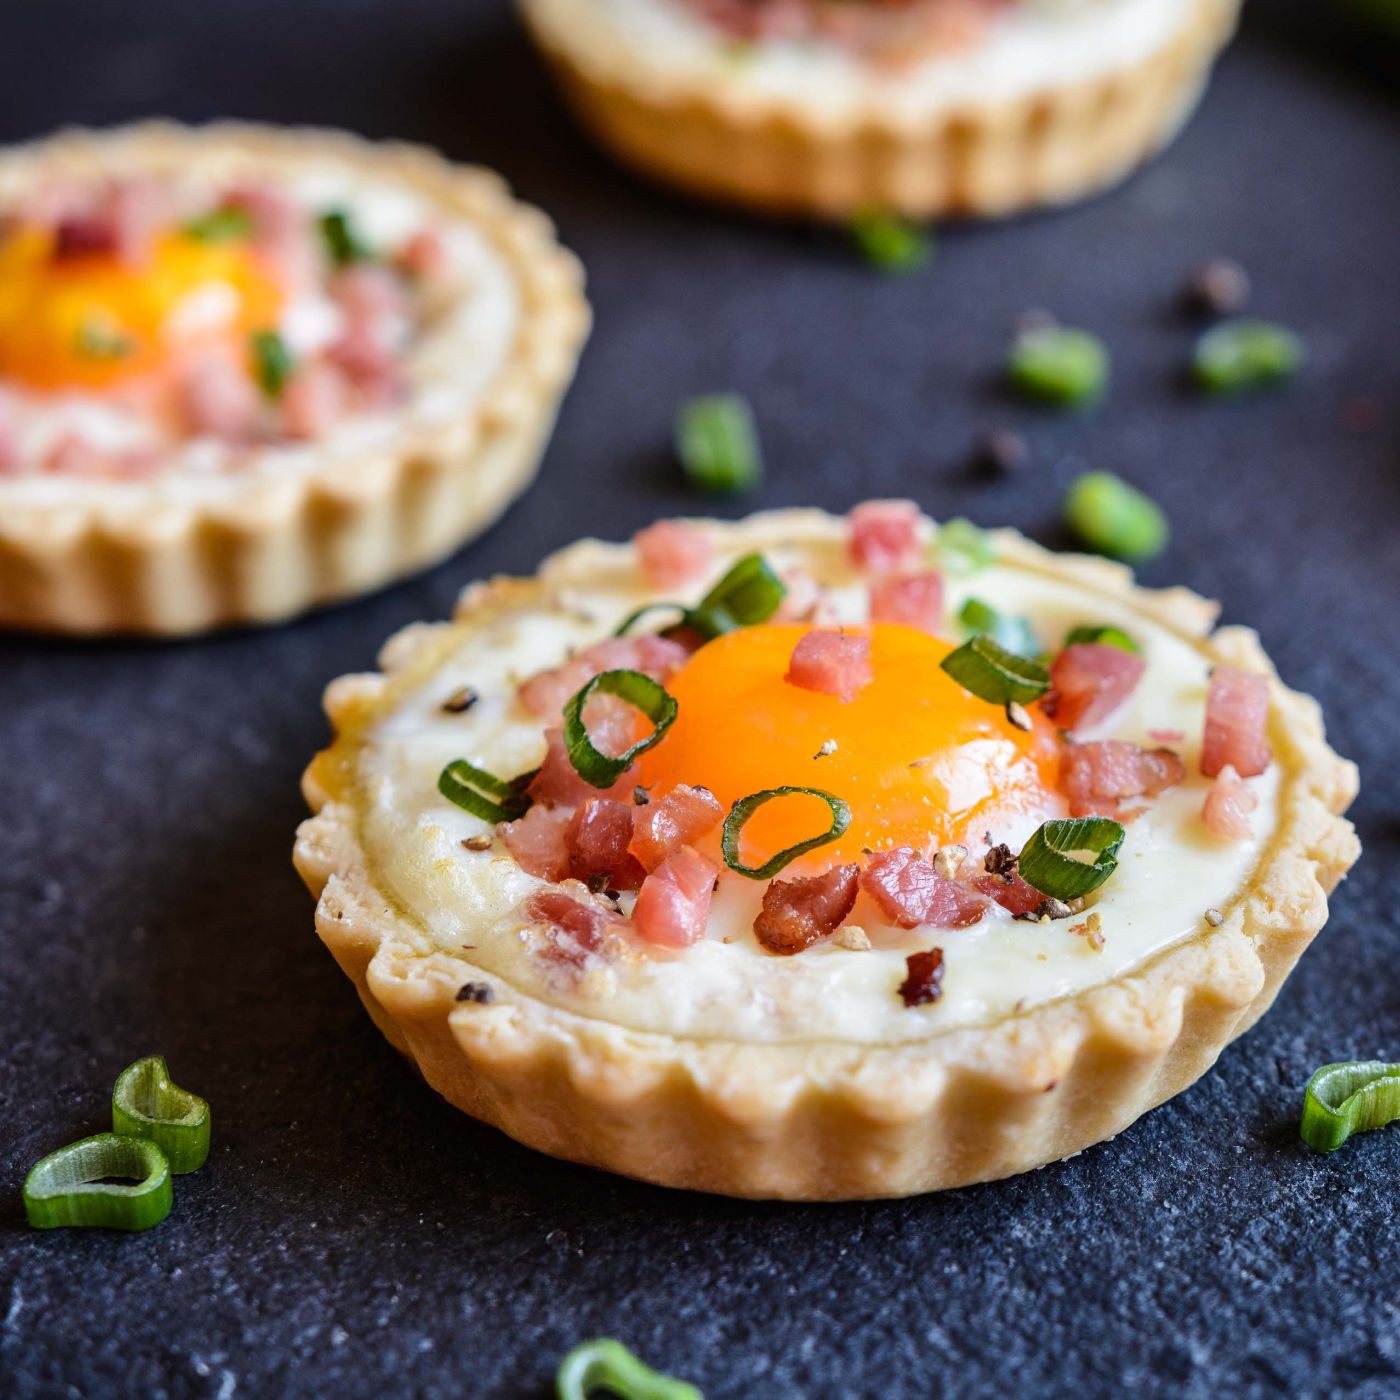 Baked-egg-and-bacon-tartlets-802449408_3903x2556 square.jpeg